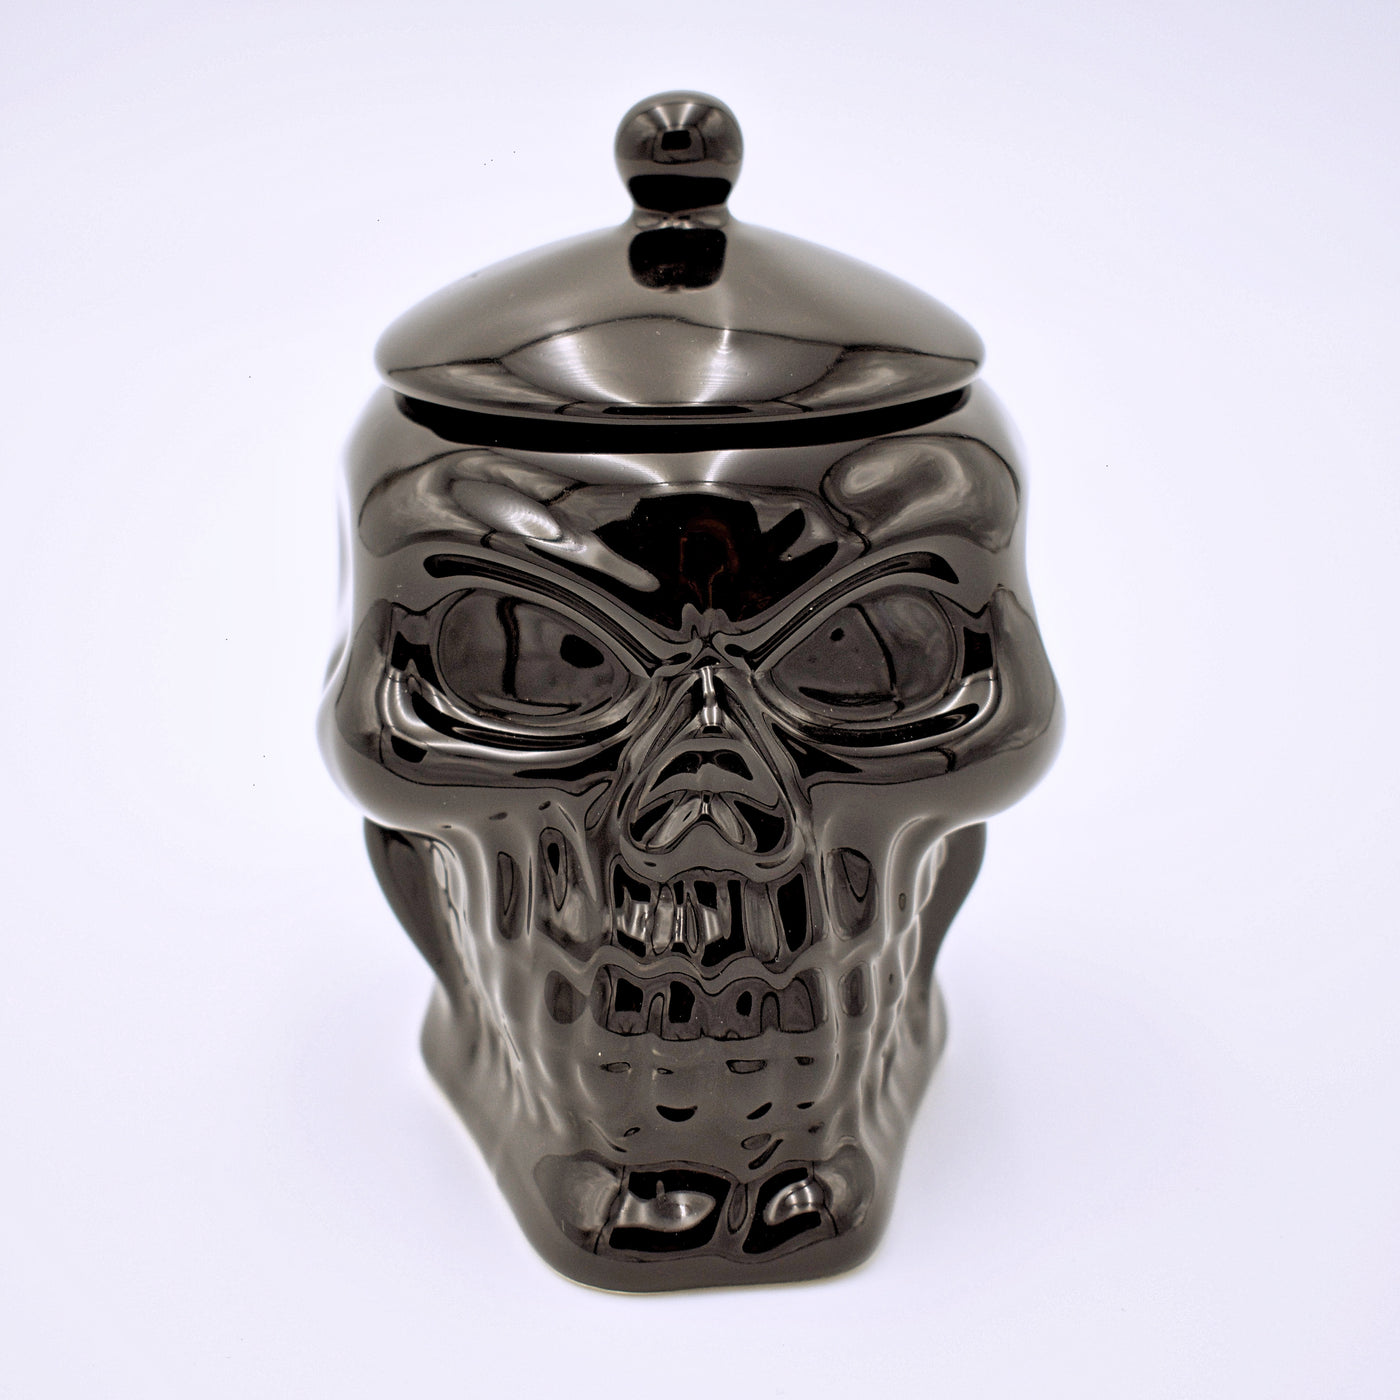 Porcelain Skull Sugar Bowl with Lid - The Cranio Collections